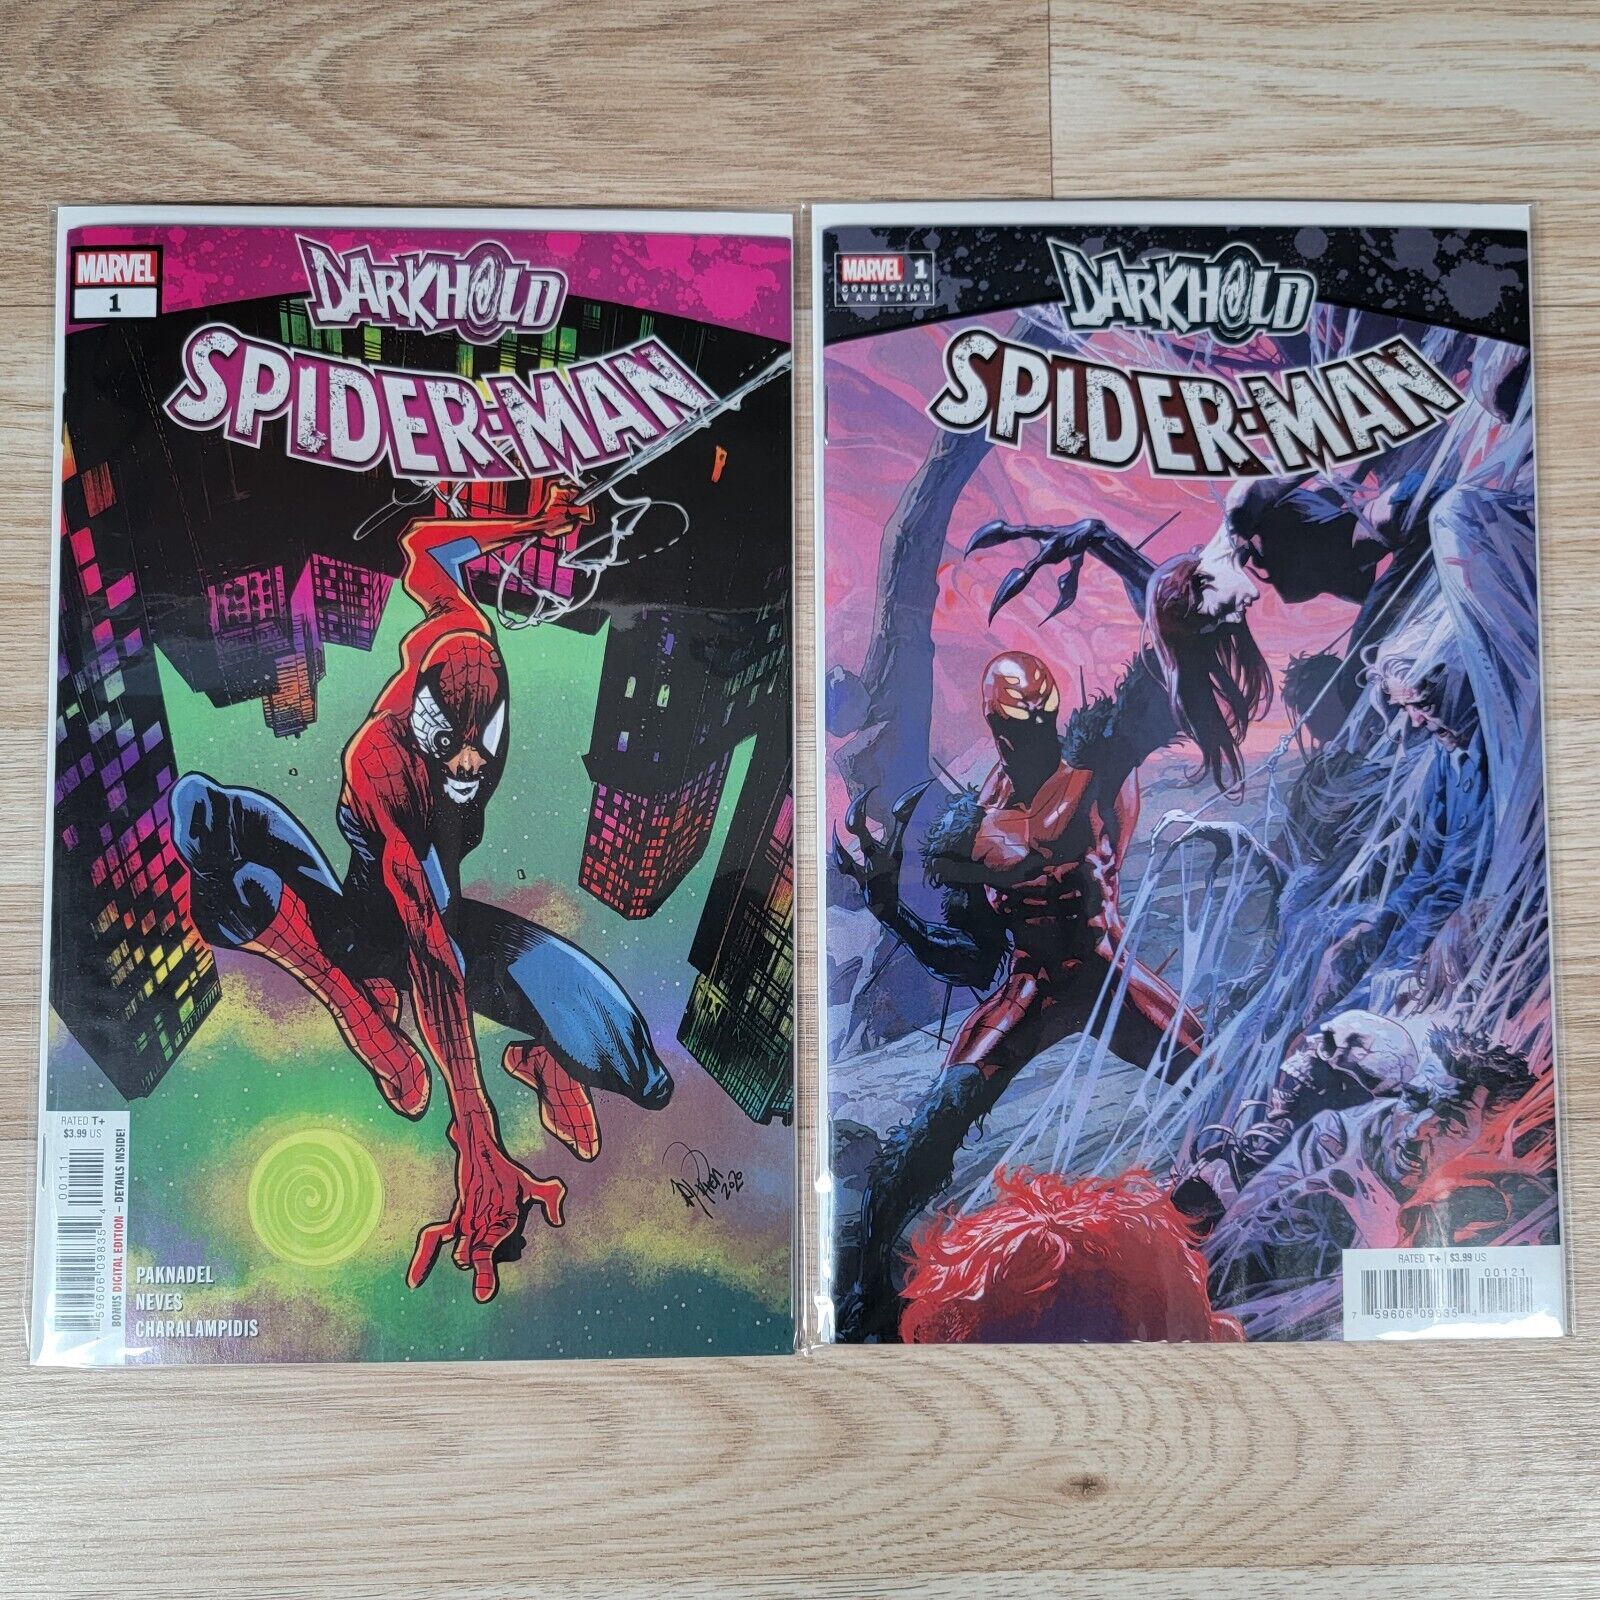 Darkhold Spider-Man #1 Cover A B Marvel Comics 2021 Lot of 2 - NM